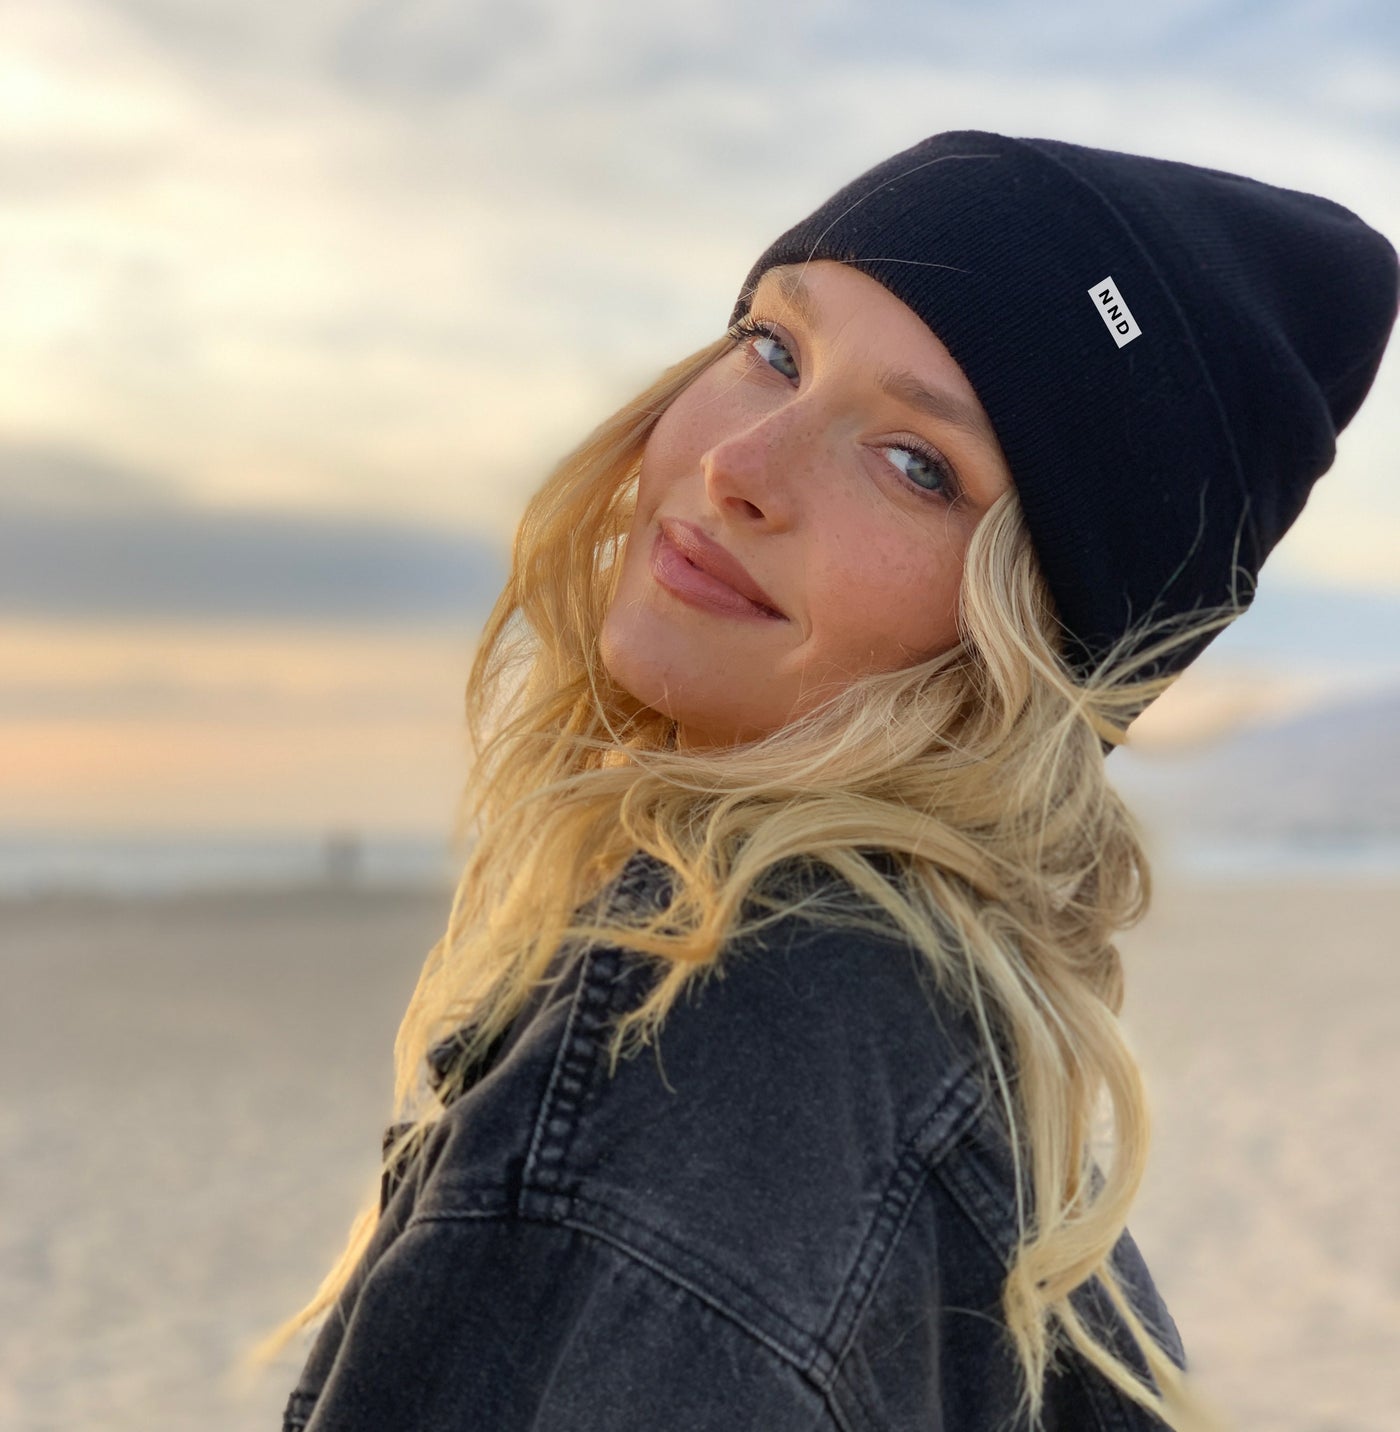 The Camille Kostek Collection